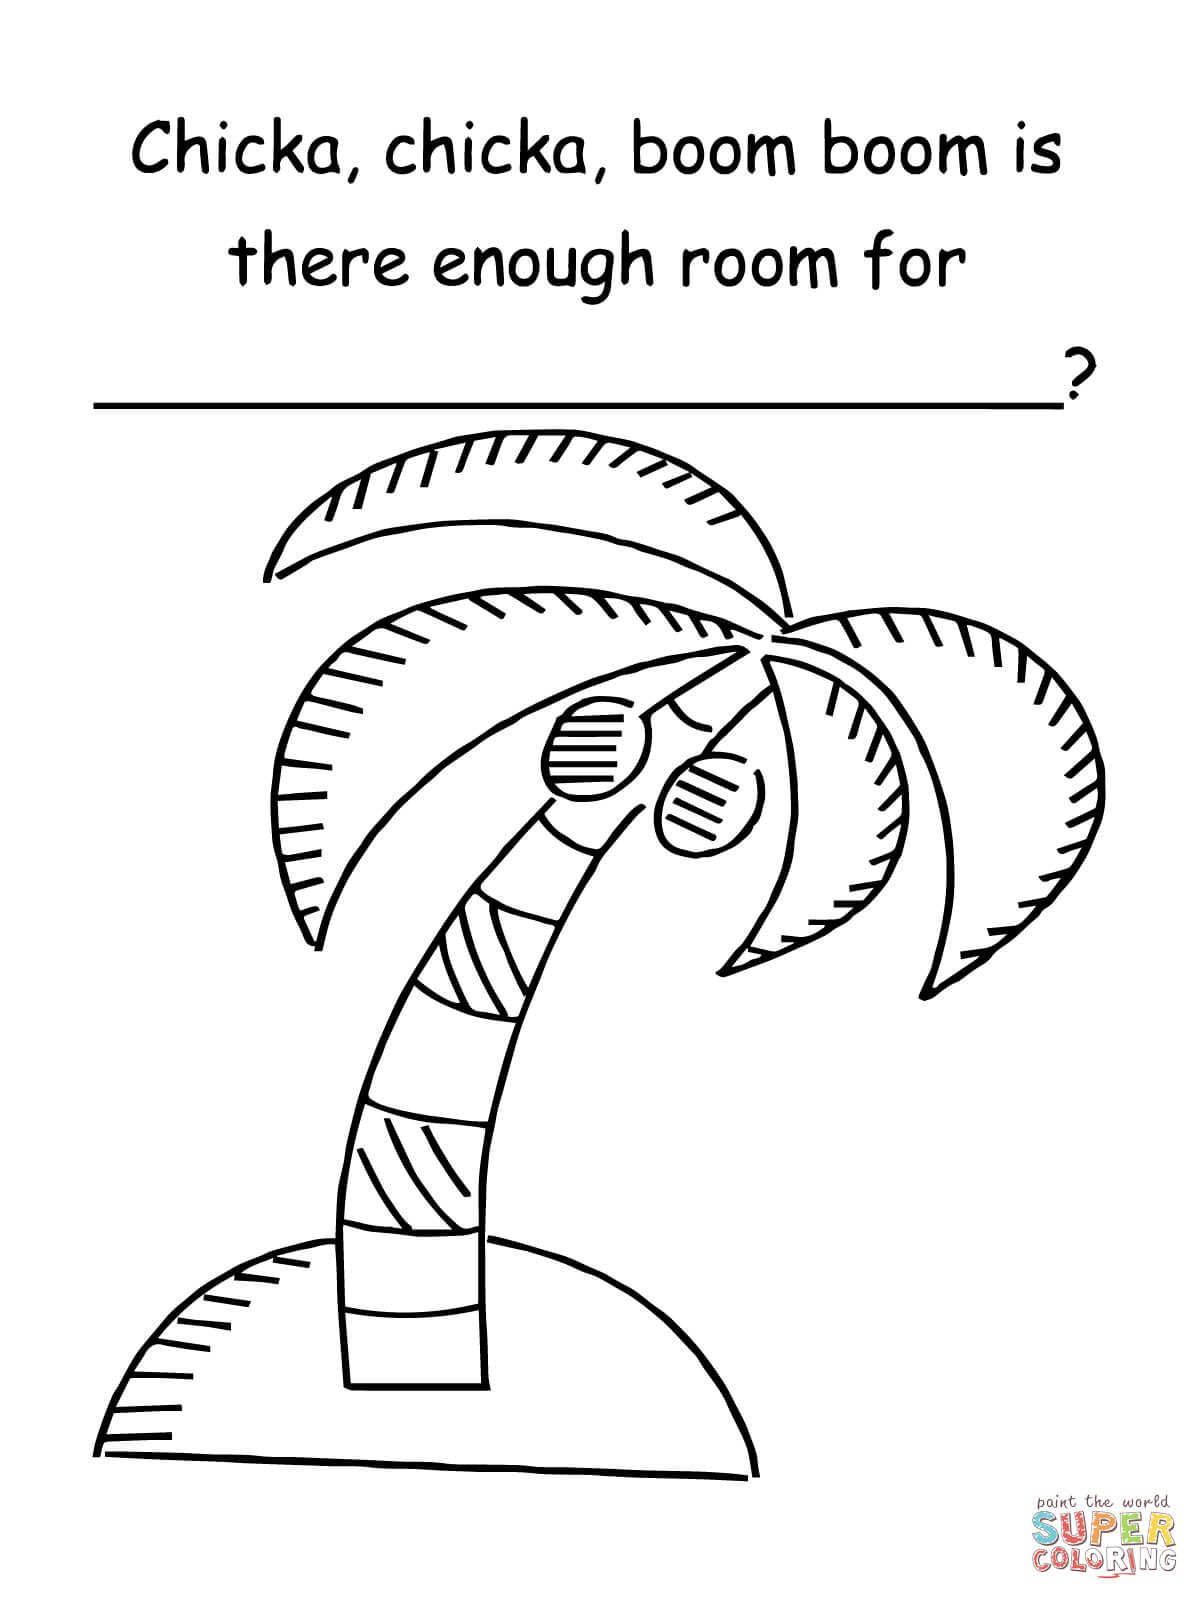 My Room Coloring Pages Chicka Chicka Boom Boom Is There Enough Room For Coloring Page